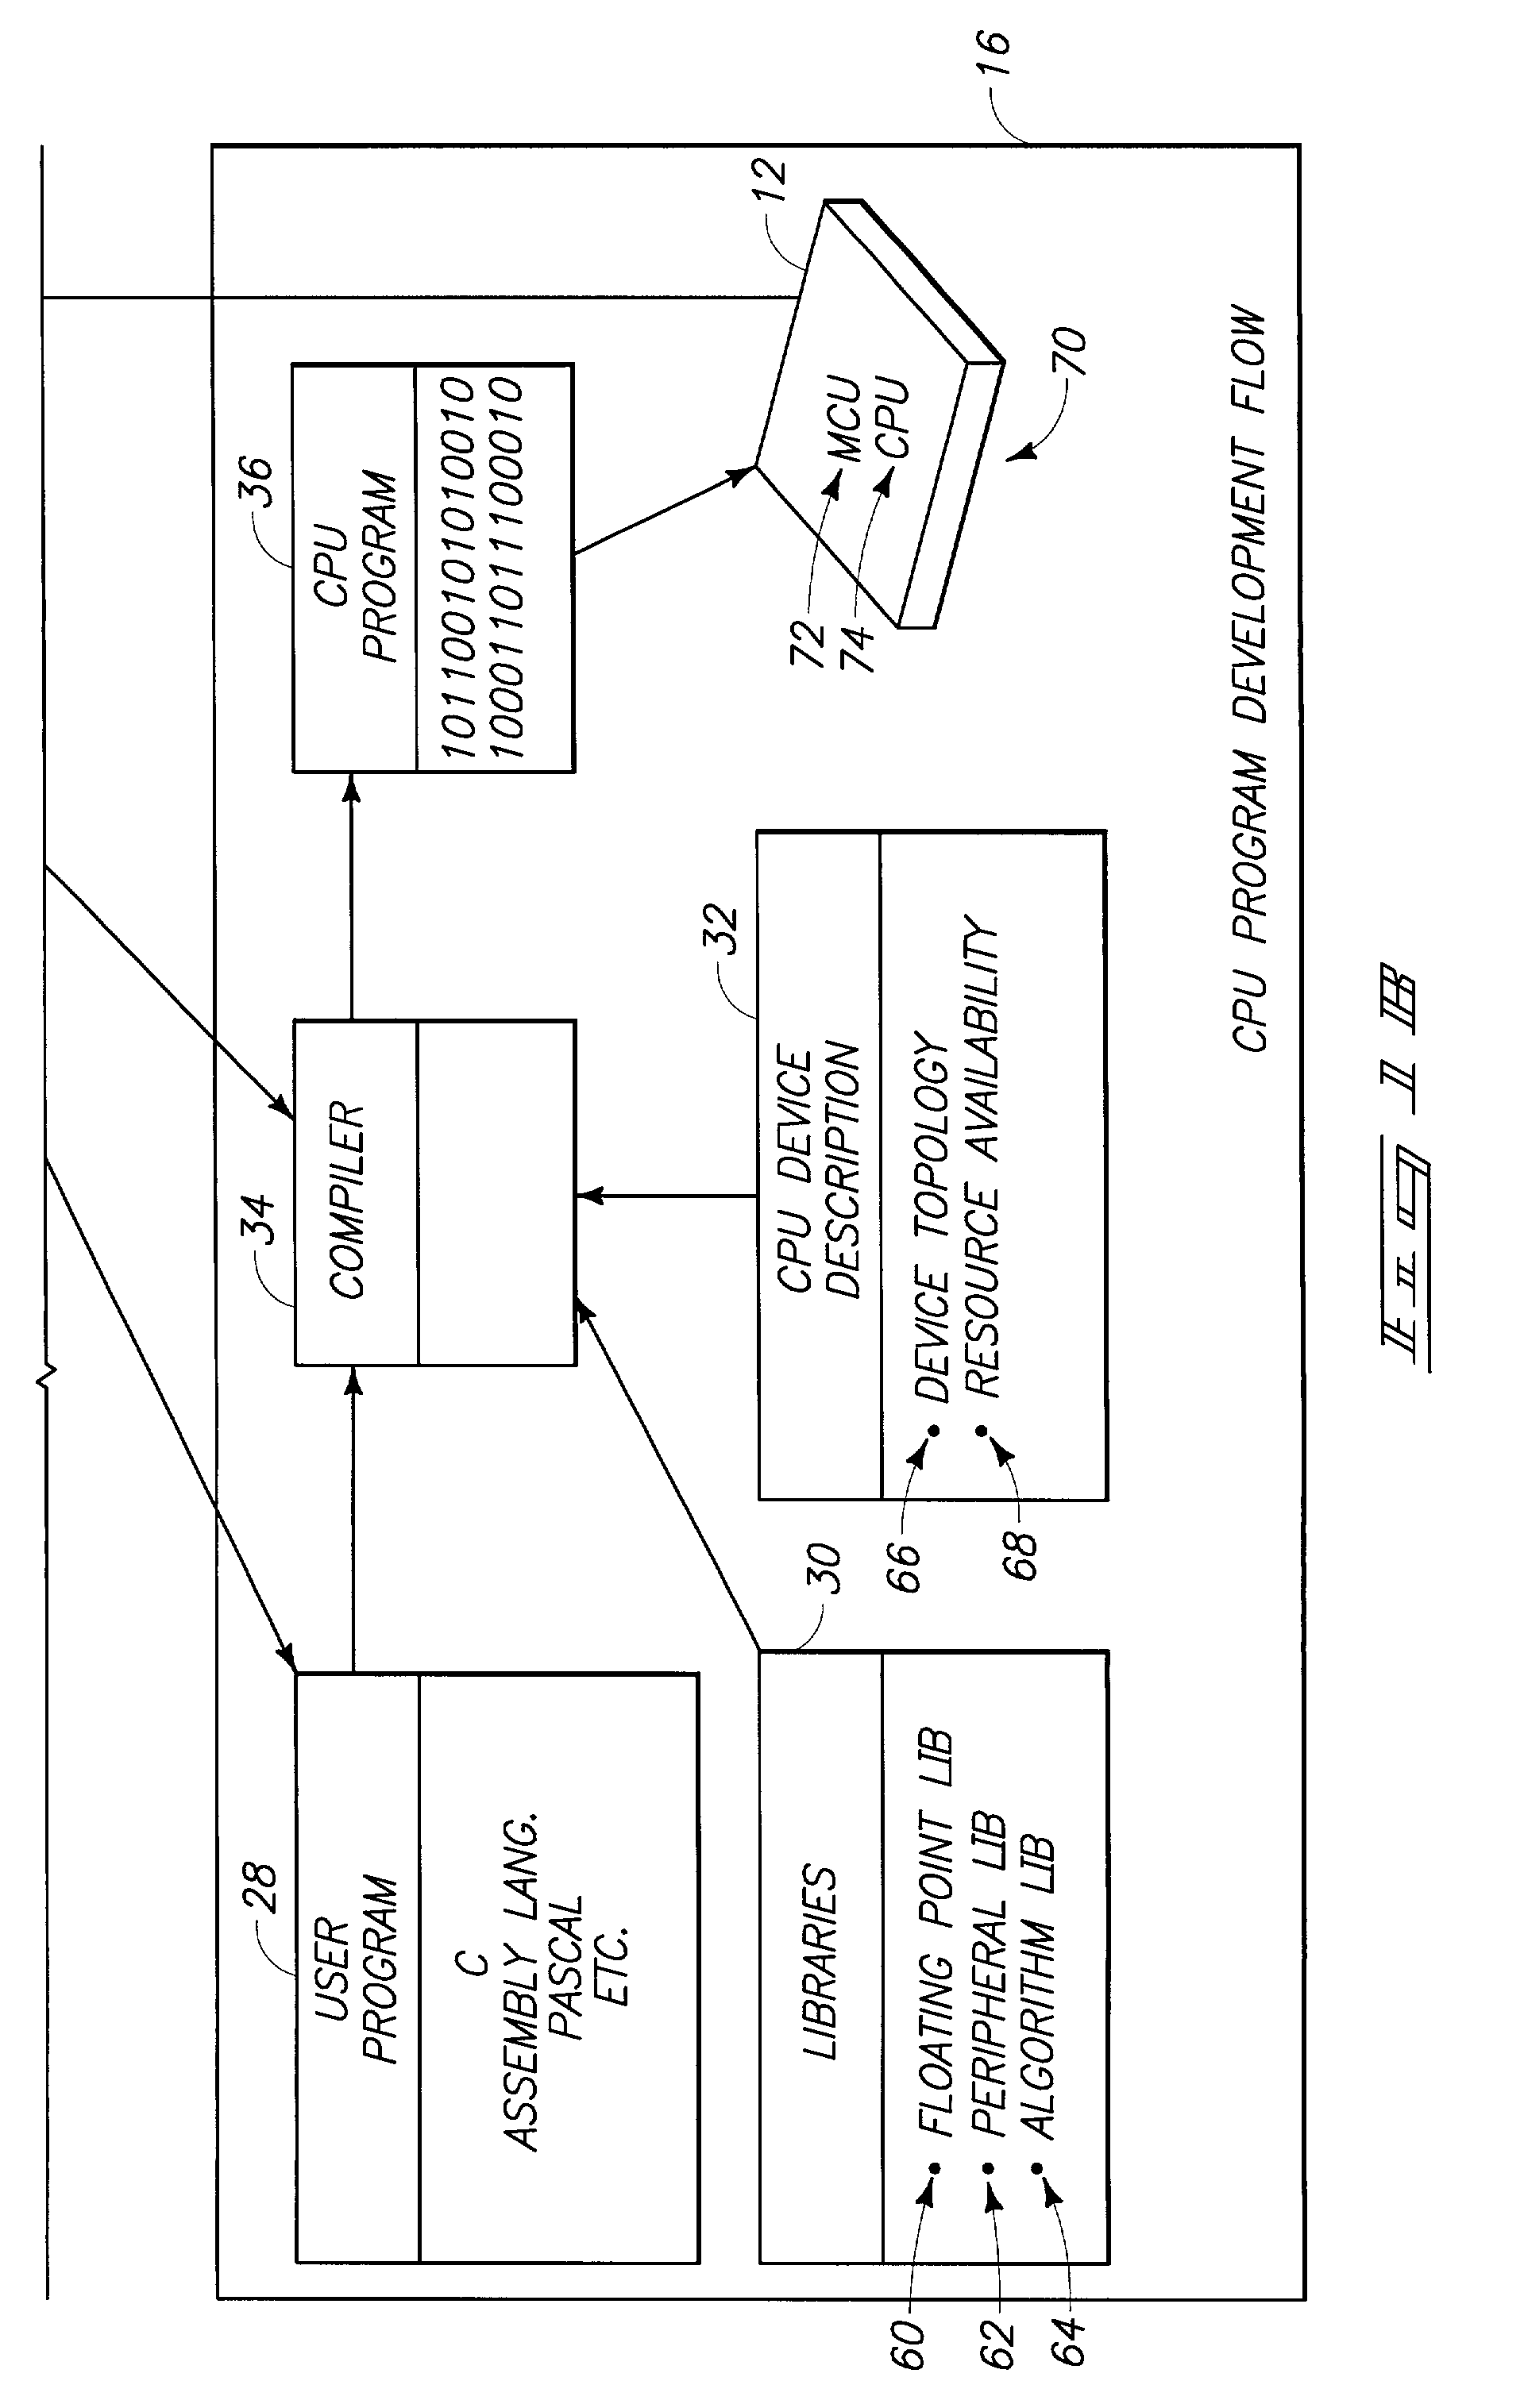 System and method for configuring analog elements in a configurable hardware device